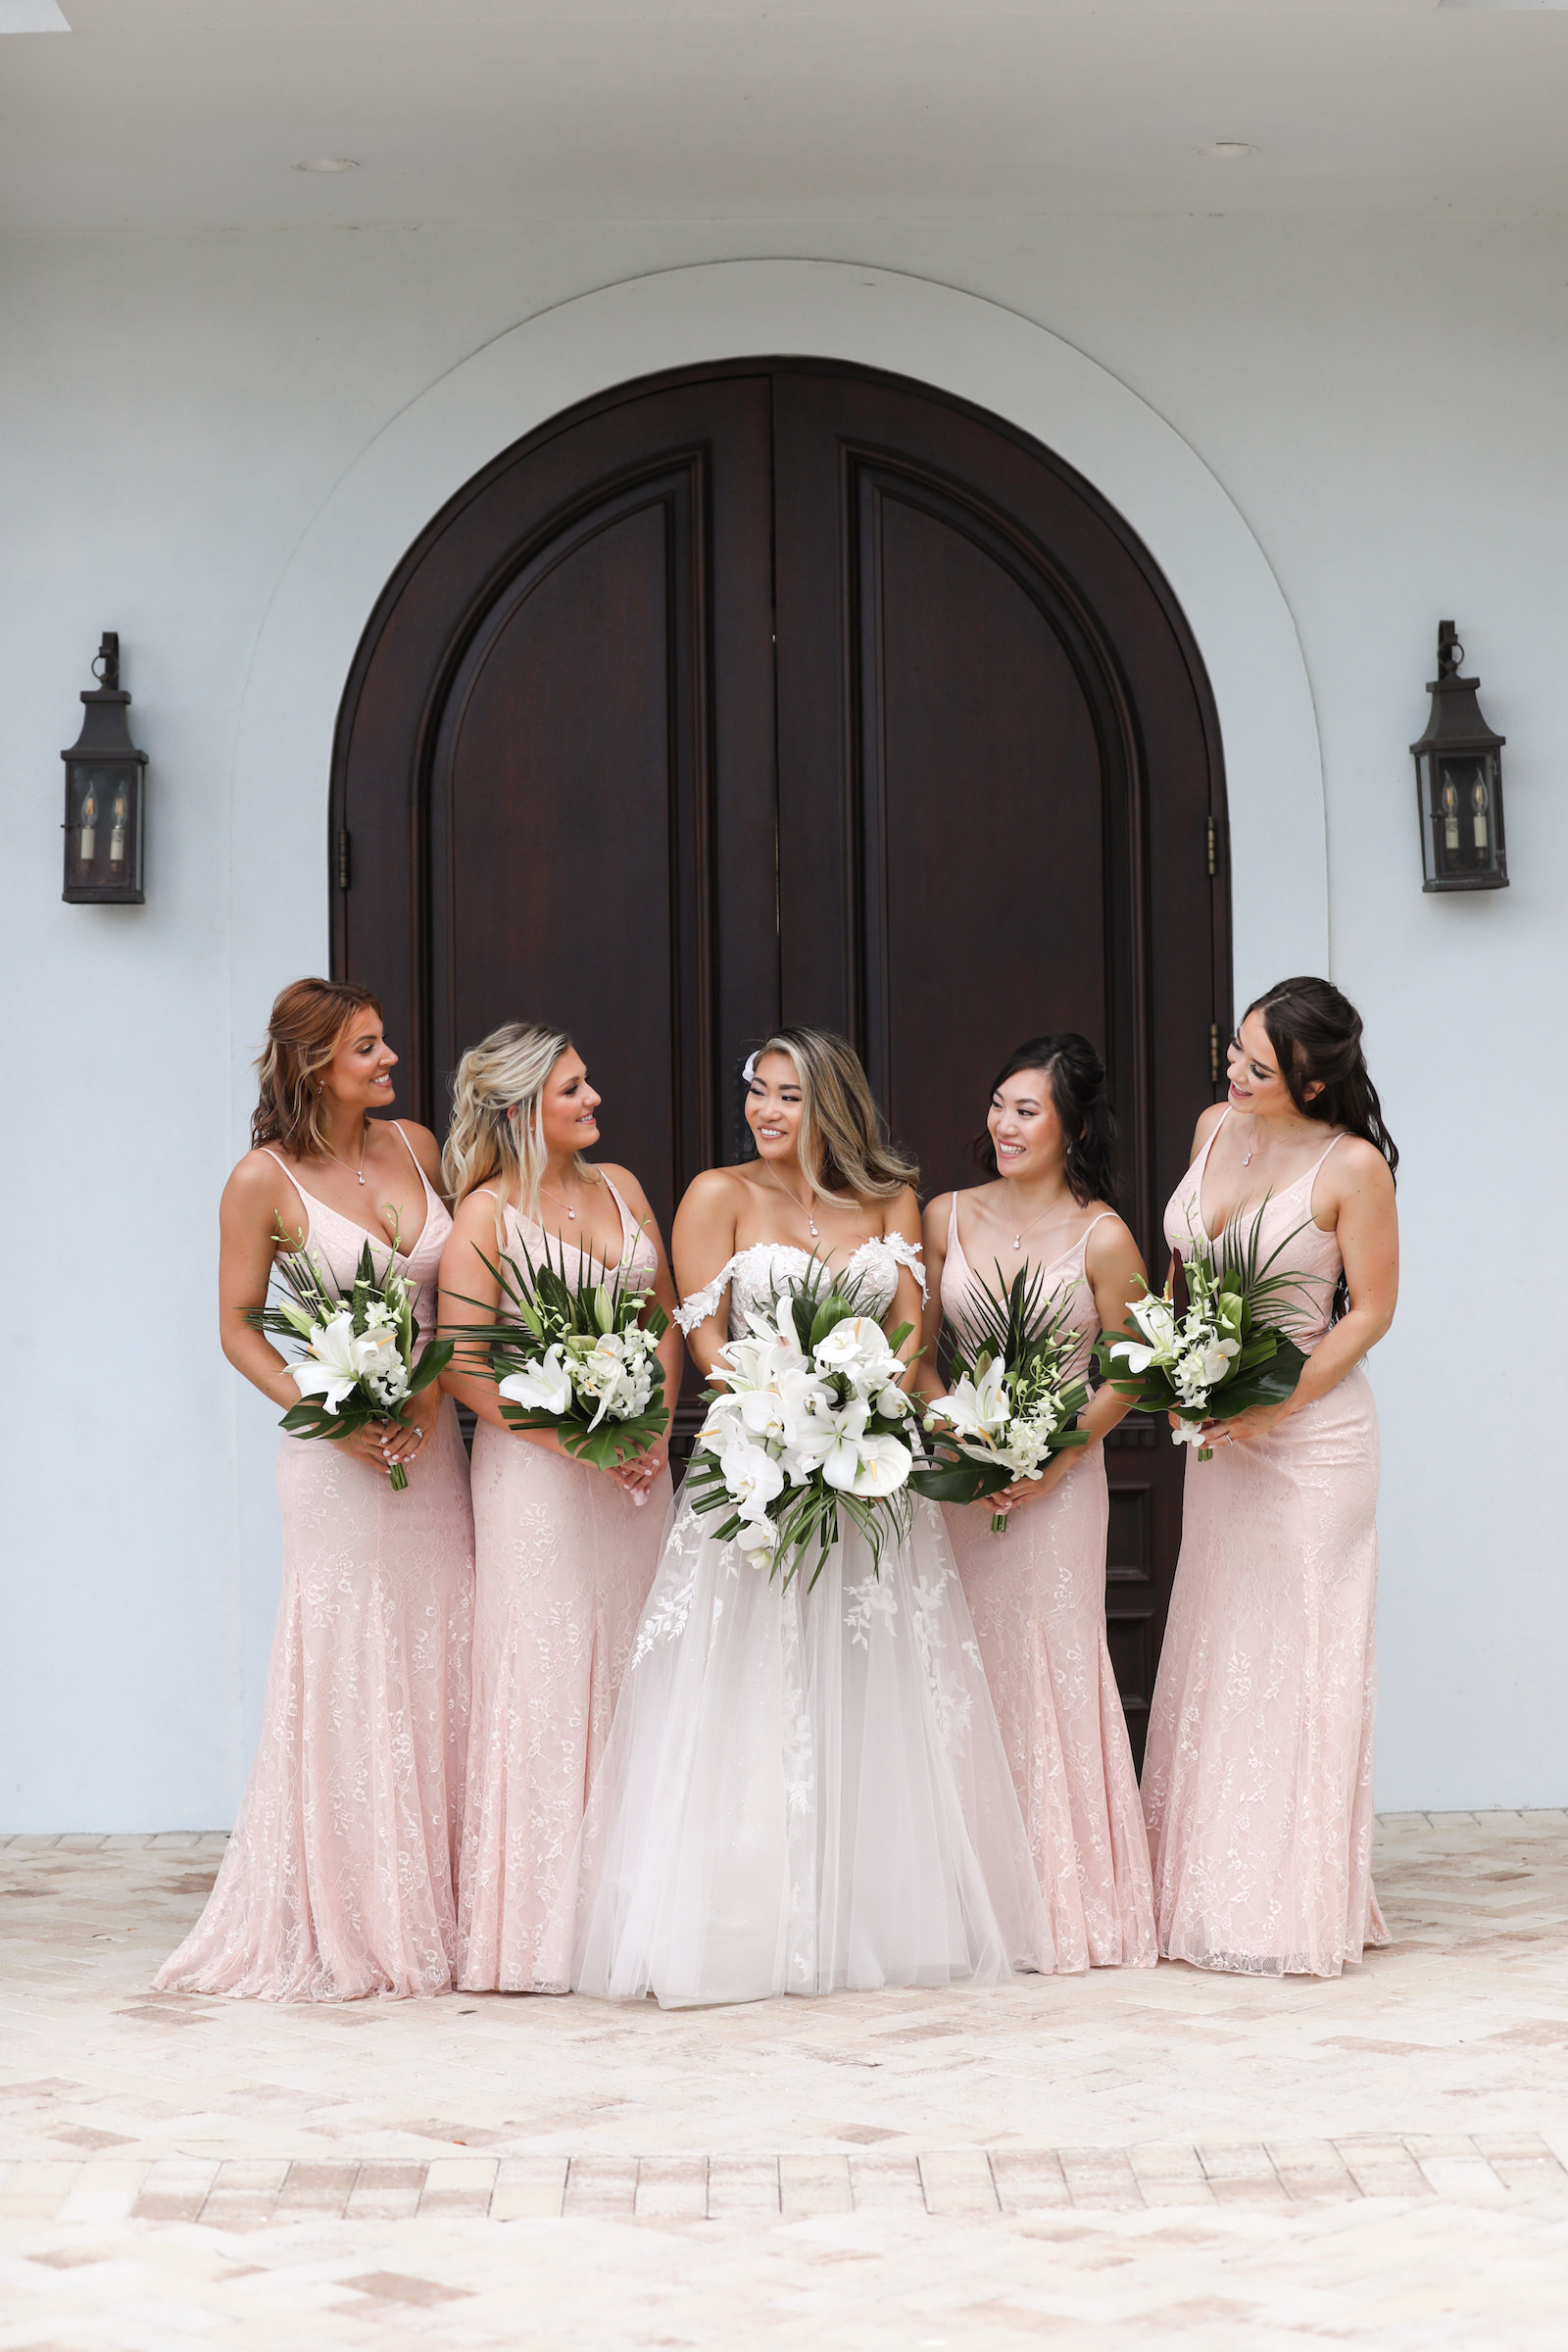 Bride and Bridesmaids in Pale Pink Wedding Portrait | Lifelong Photography